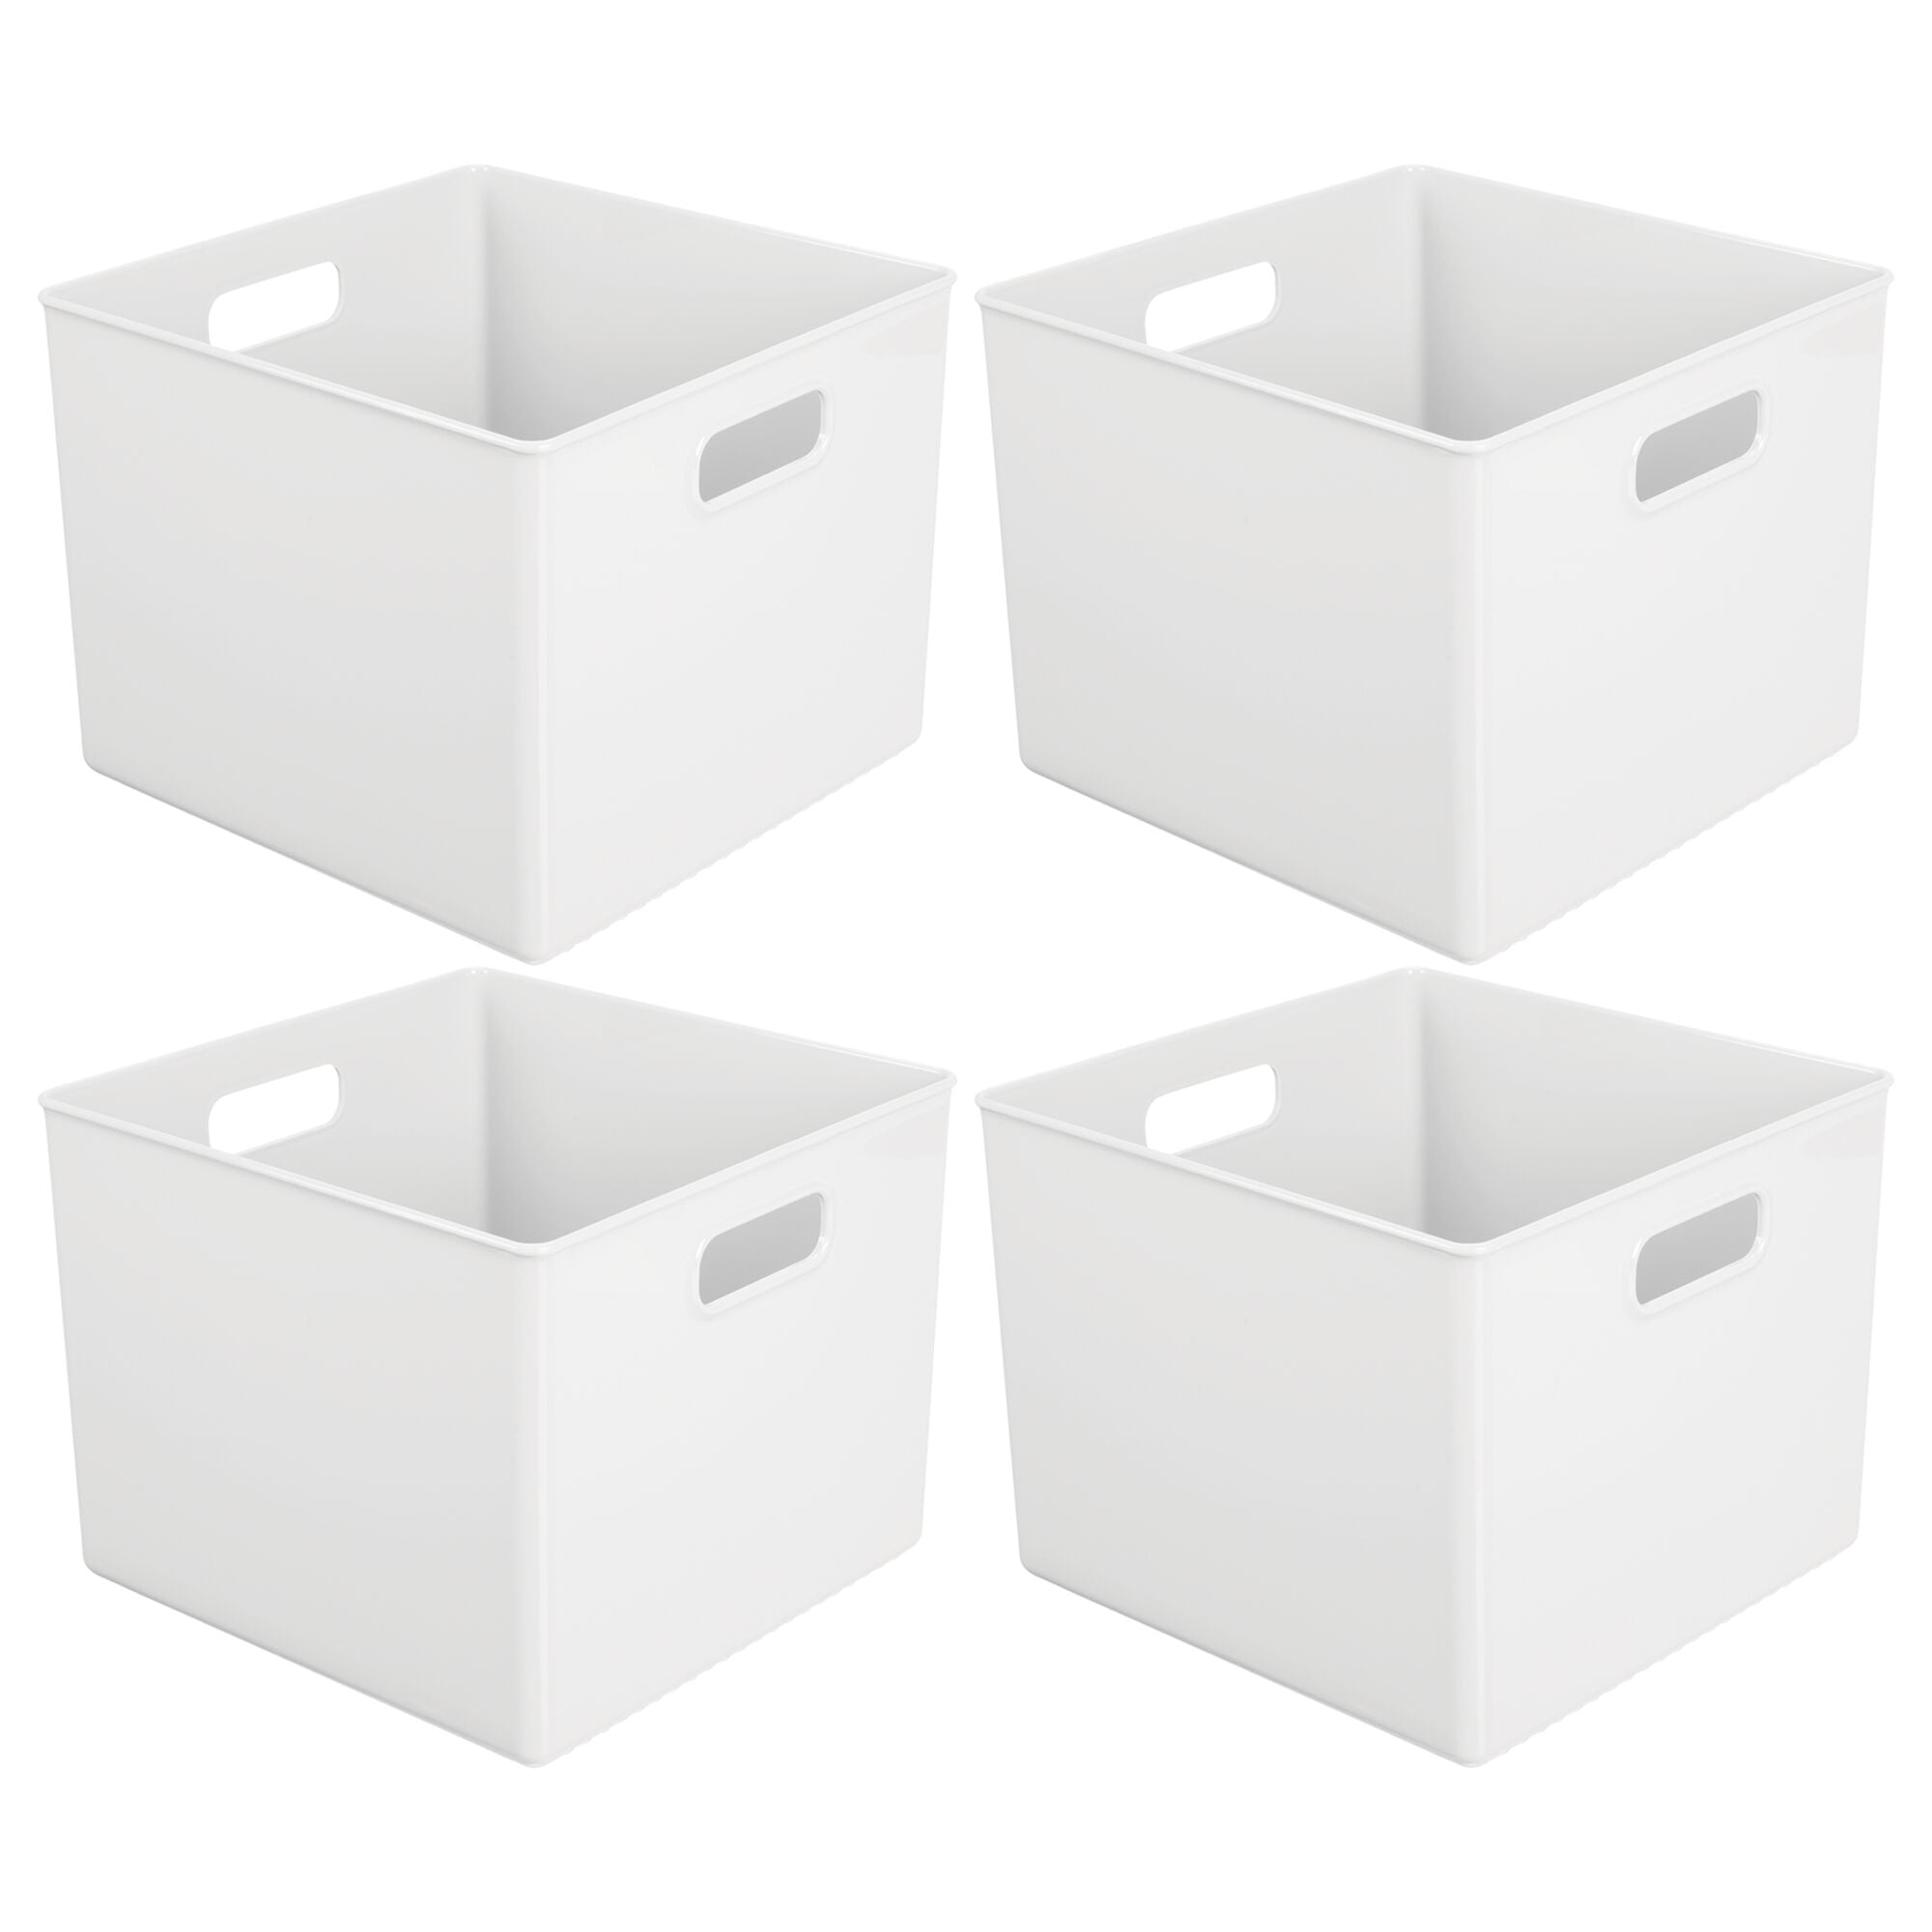  mDesign Small Plastic Office Storage Container Bins with  Handles for Organization in Filing Cabinet, Closet Shelf, or Desk Drawers,  Organizer for Notes, Pens, Pencils, Ligne Collection, 4 Pack - Clear 